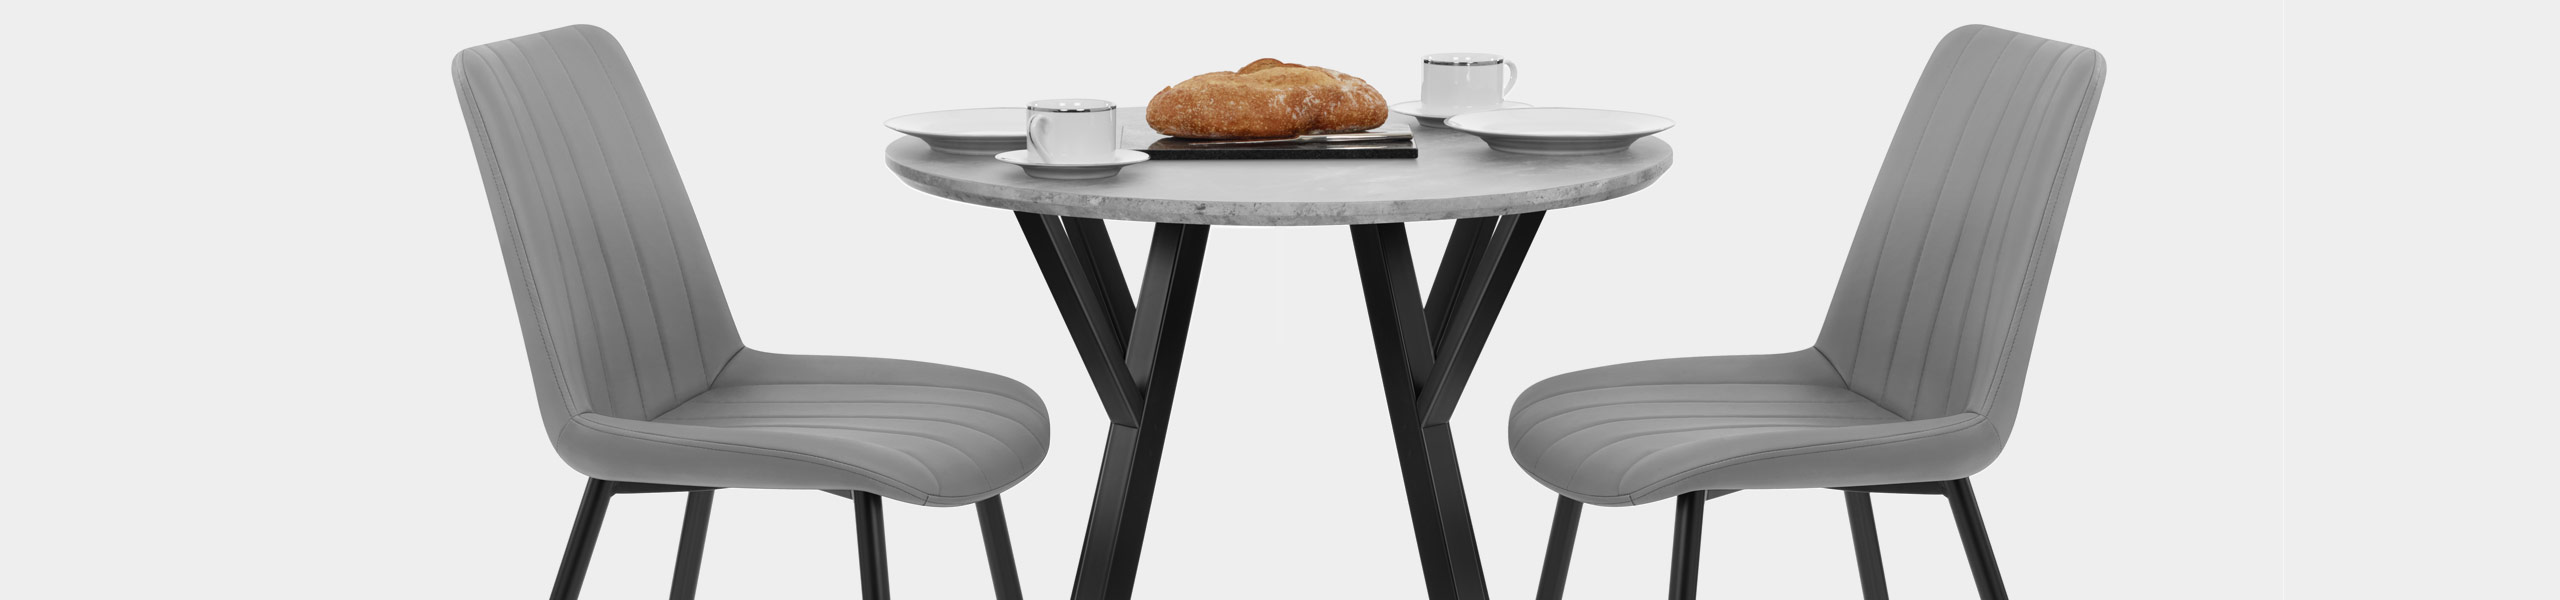 Wessex Dining Set Concrete & Mid Grey Video Banner